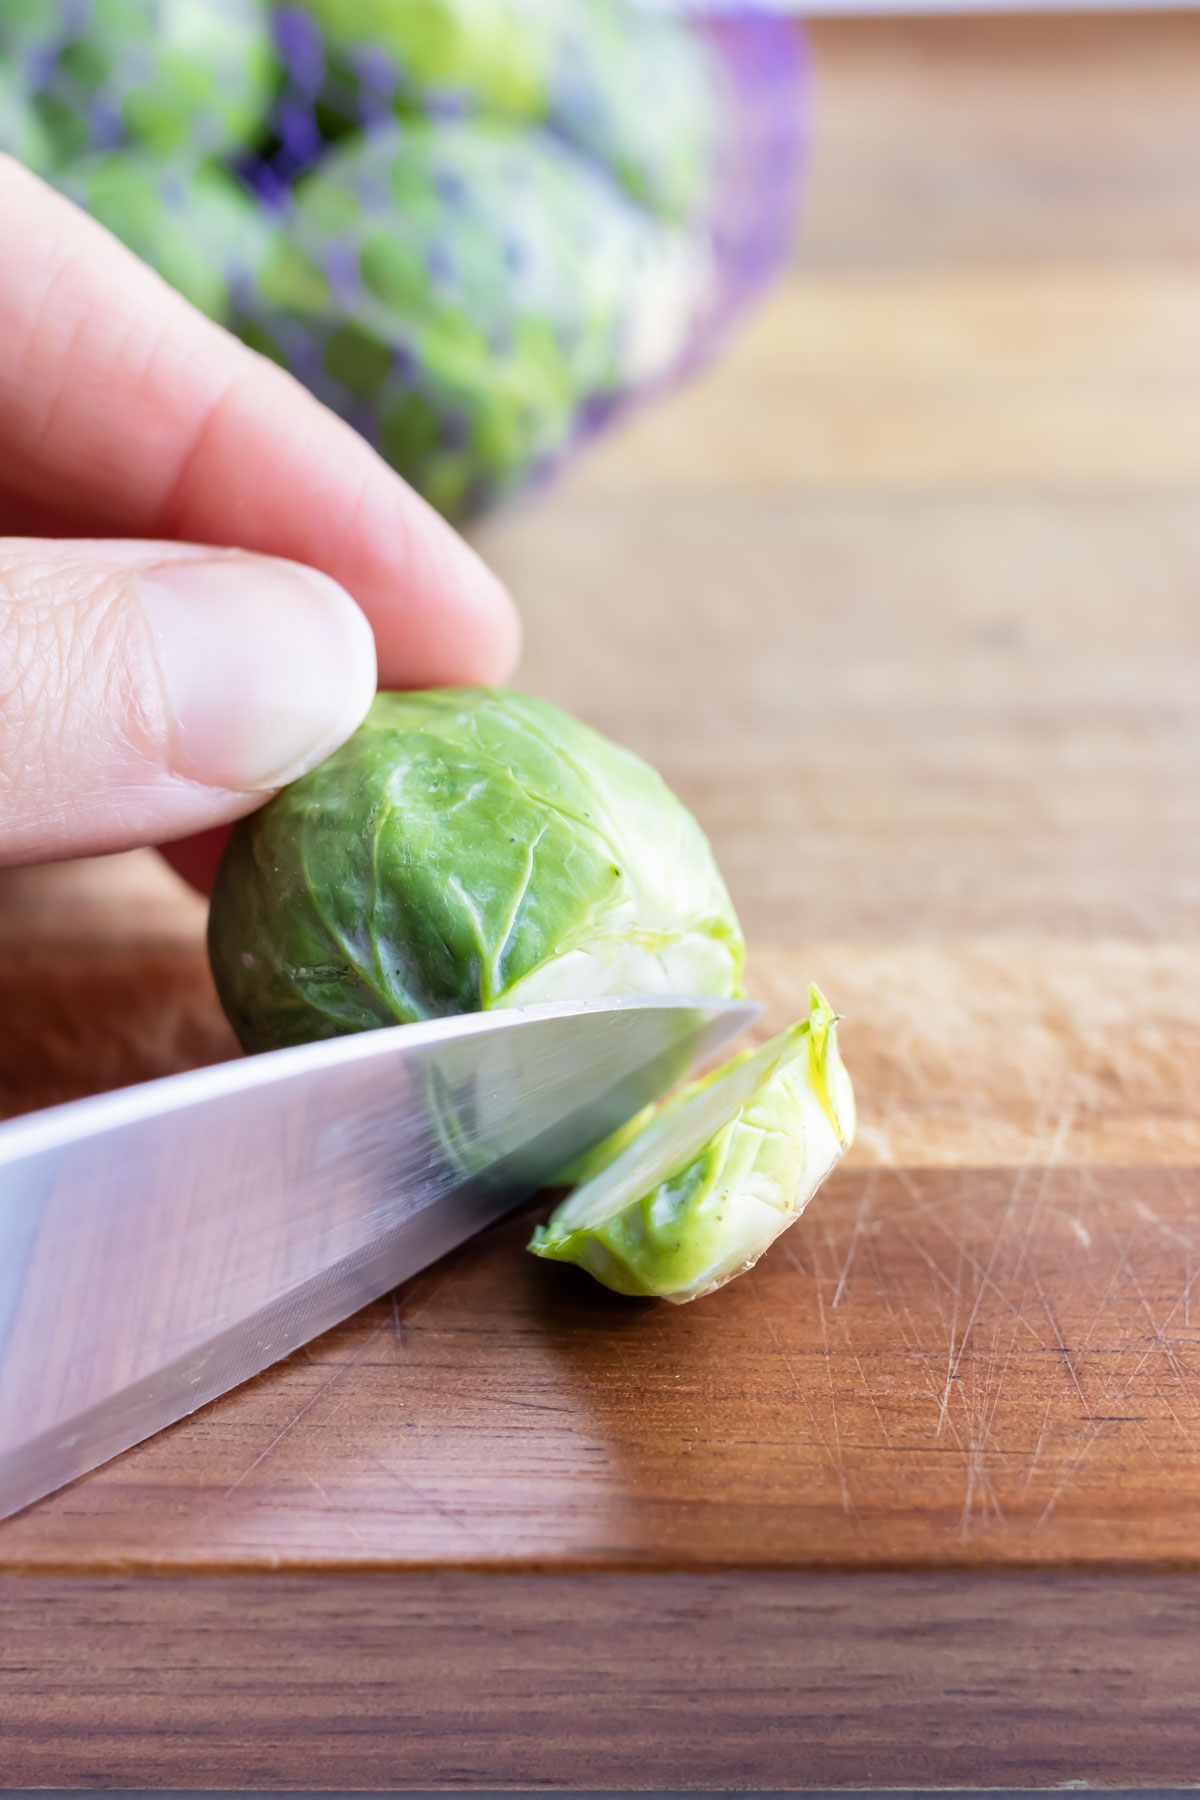 A brussel sprout is chopped and prepared for cooking.